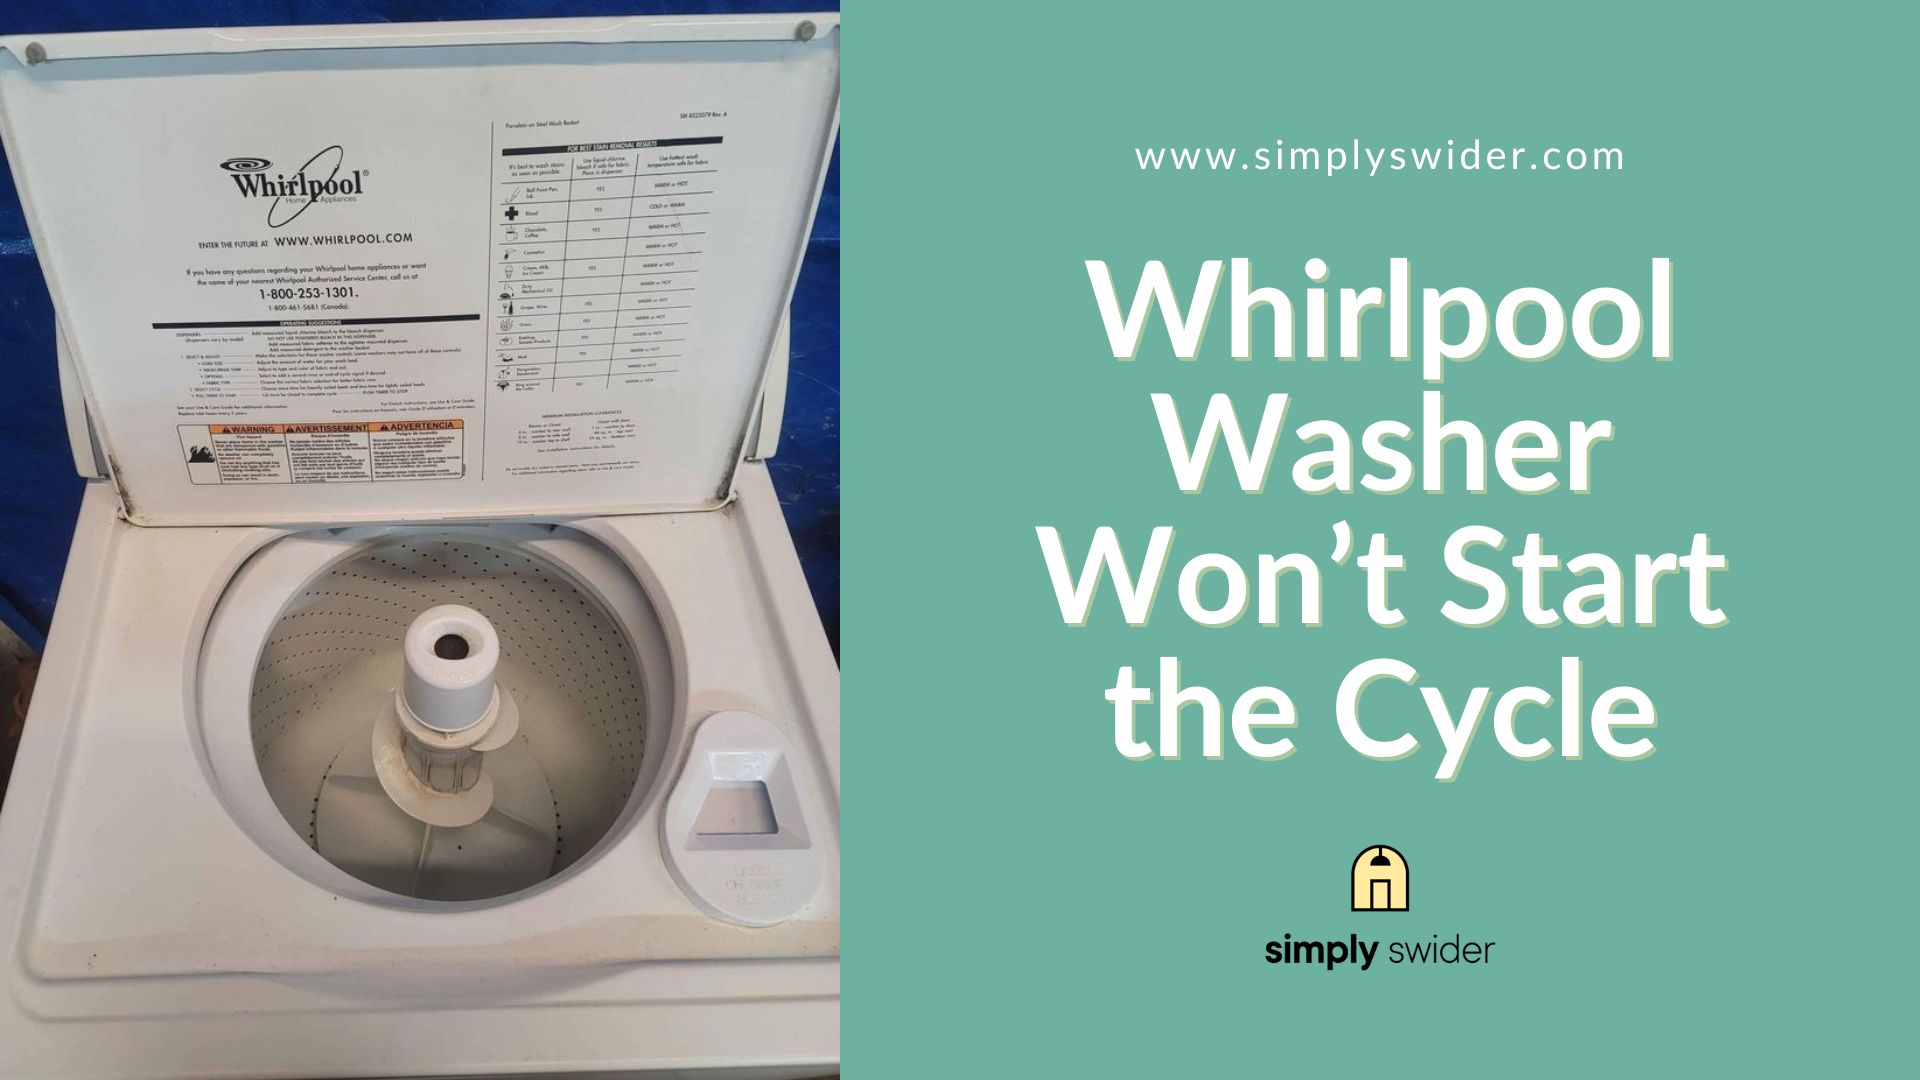 Whirlpool Washer Won’t Start the Cycle